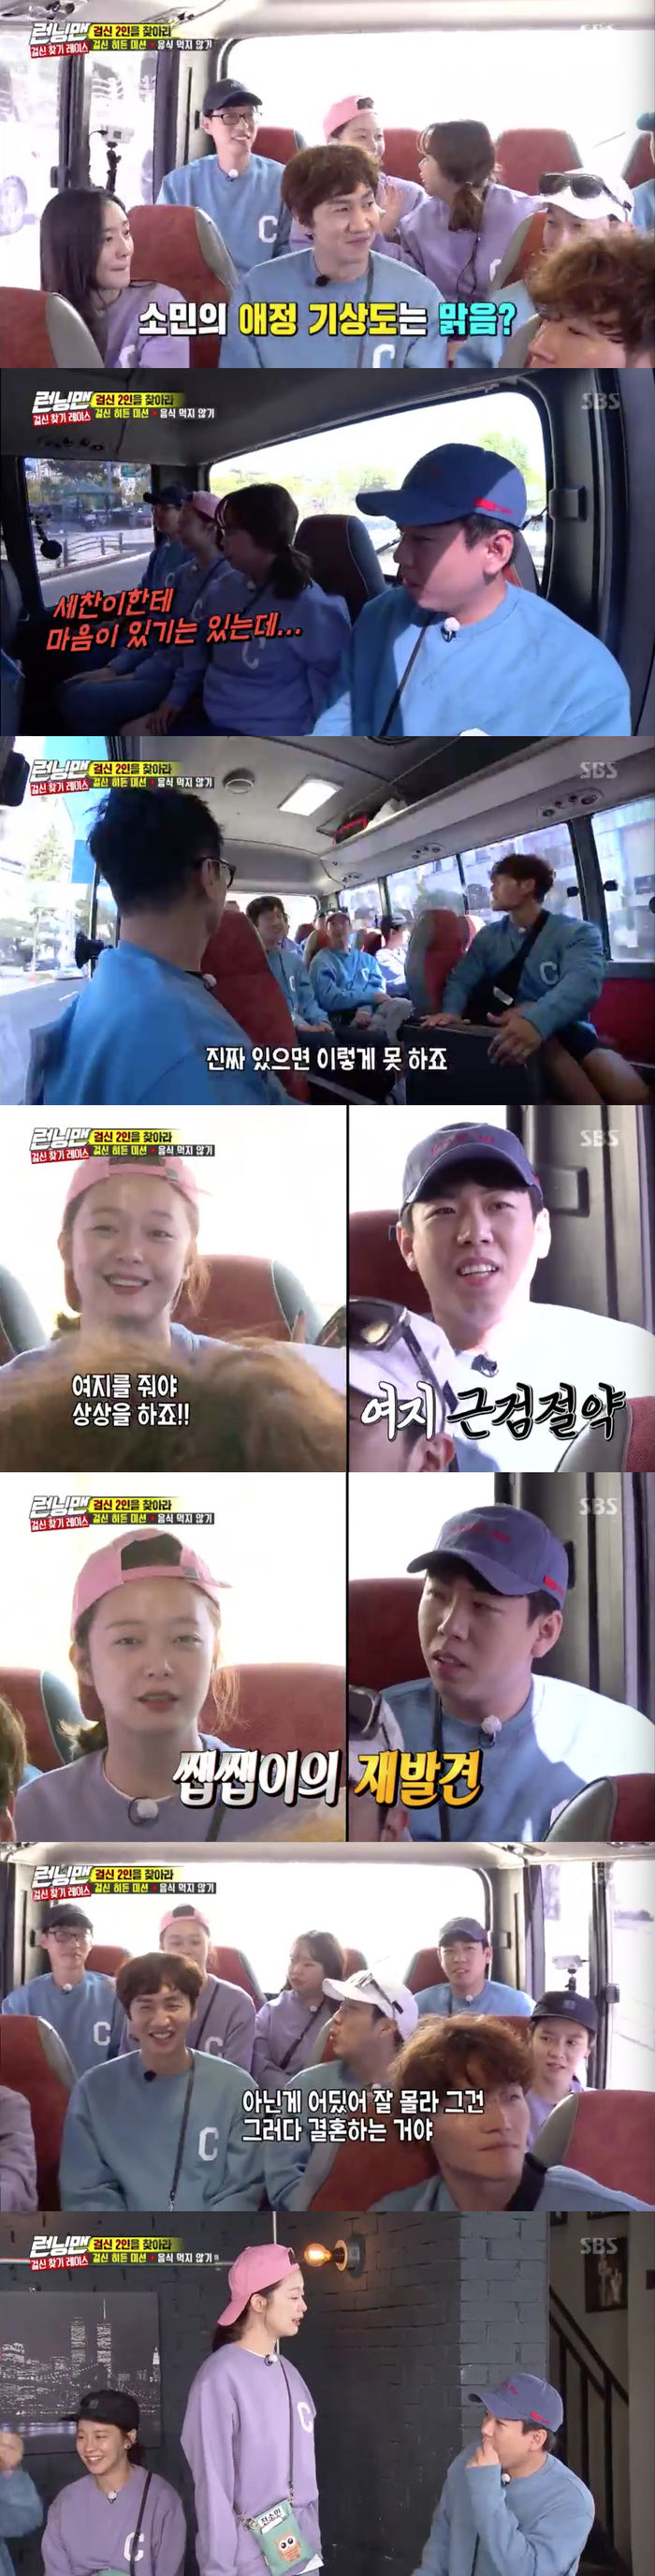 Is the love line between Jeon So-min and Yang Se-chan in progress?On SBS Running Man broadcasted on the 3rd, a search race was held.On the day of the show, the members took a bus for the mission. The members spent time listening to Hong Hyun-hees love story. Hong Hyun-hee said, I thought I was going to live alone.I do not know what life will be like. So, Jeon So-min asked, When does it feel like it? Yoo Jae-Suk said, There is no time now.But I have a little heart for Chan. So, Jeon So-min said, If you are real, you can not do this. Kim Jong Kook, who listened to this, asked, Do you think you have a mind, but your parents like it and you do not imagine what it is like to marry?So, Jeon So-min said, What do you think you should give me? But it is more attractive because you do not have room.Its more pumpkin than she looks, so its cool. If I get married, I only like my woman and I think so. So Hong Hyun-hee said, Its attractive.I thanked Park for telling me that he was not a good man. At this time, Jeon Sang-min looked at Yang Se-chan and said, Why do not you say it to me? Yang Se-chan shook his head, saying, No. Then Haha said, Where is not.I do not know what happened to people. Then I get married. I said no to me separately. Running man members who arrived at the mission pRace a while later. Jeon So-min and Yang Se-chan were chatting about their seats.Song Ji-hyo said to the two, I fight, and Yoo Jae-Suk laughed, referring to Gary, who was a monthly couple, saying, Ji Hyo had such a time.